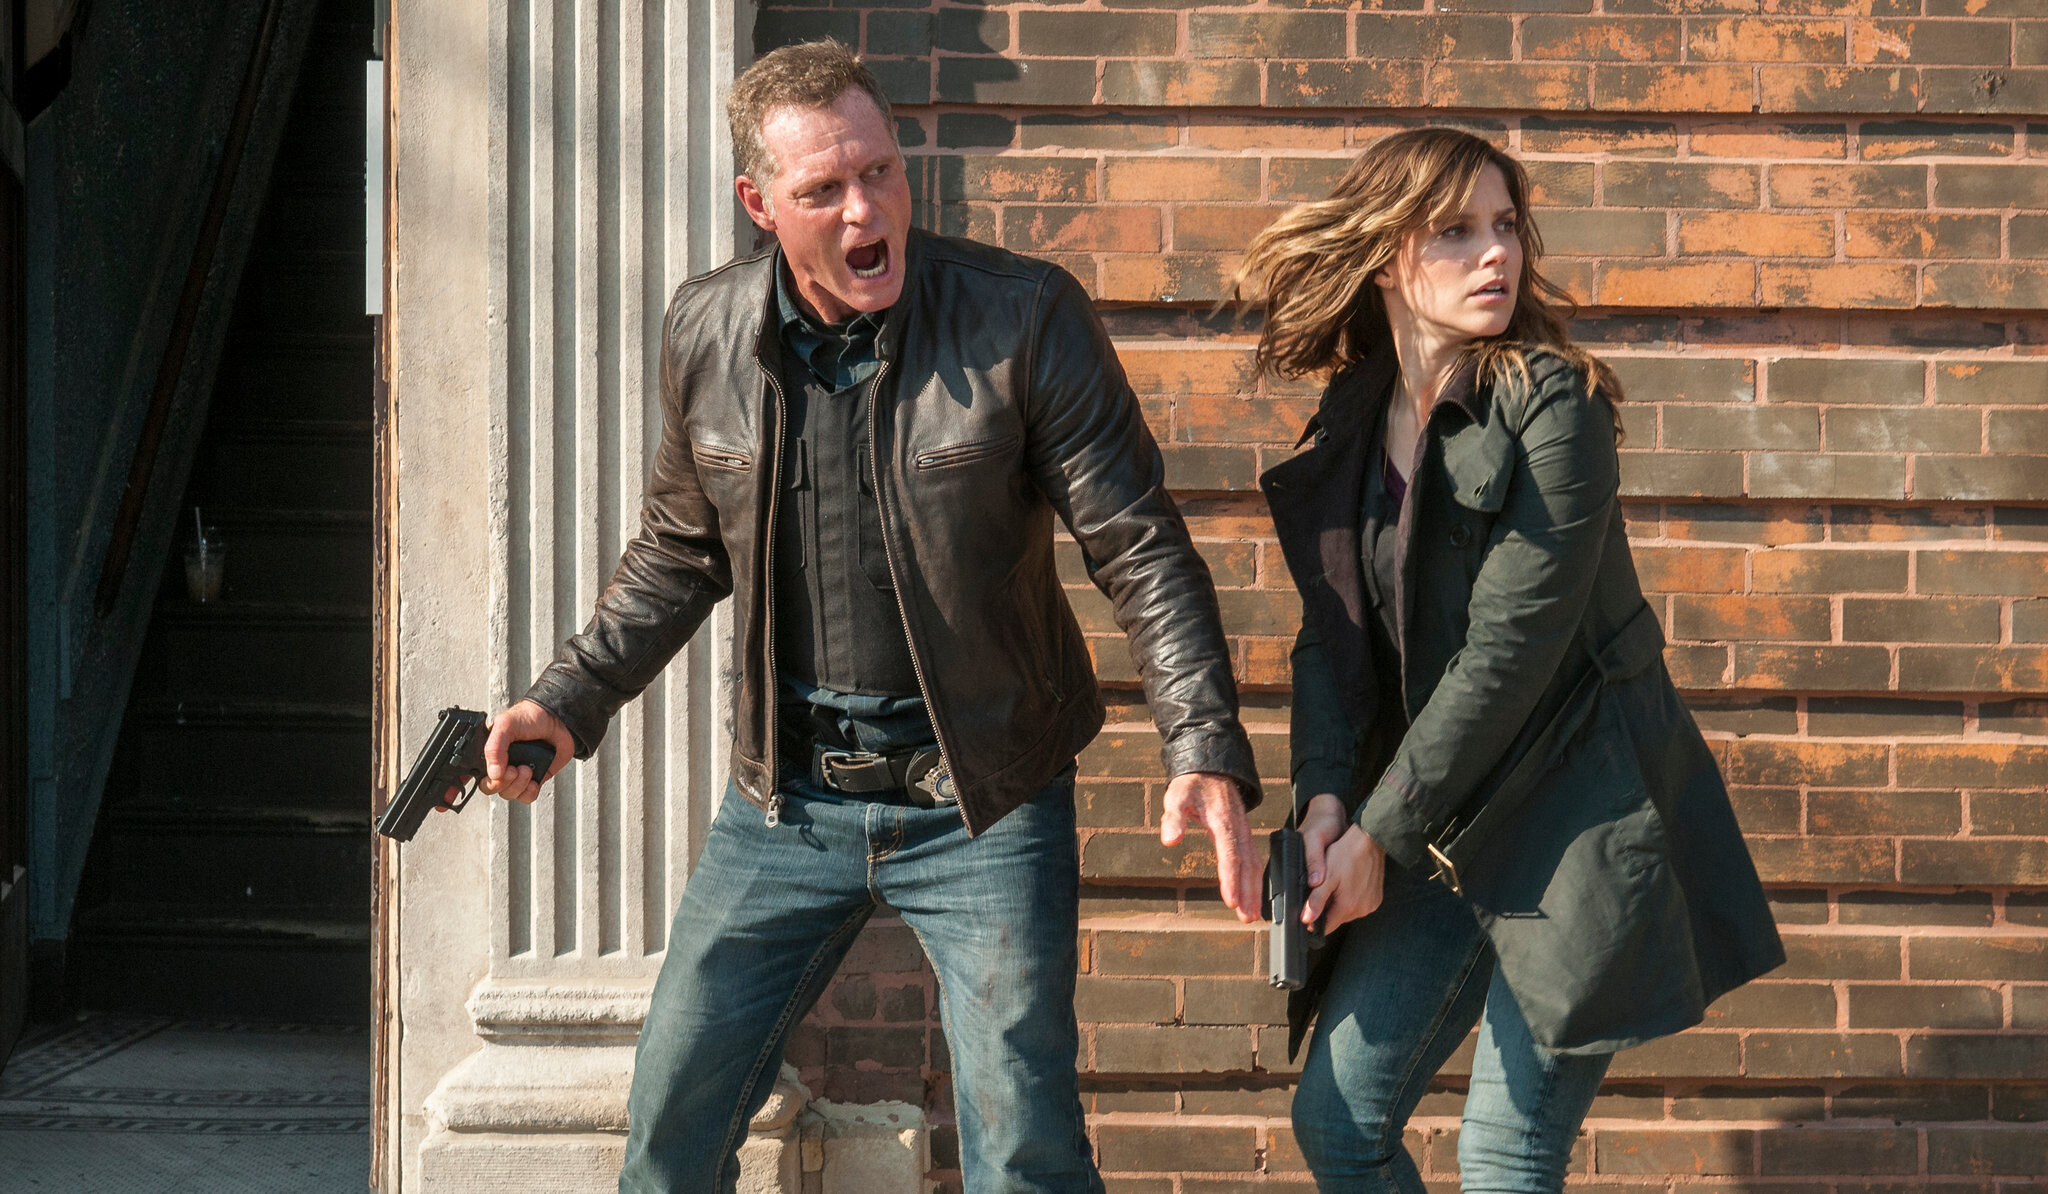 Chicago P.D. (TV Series): Season 1 Episode 1, Henry Voight And Erin Lindsay, Fire-fight, Police. 2050x1200 HD Background.